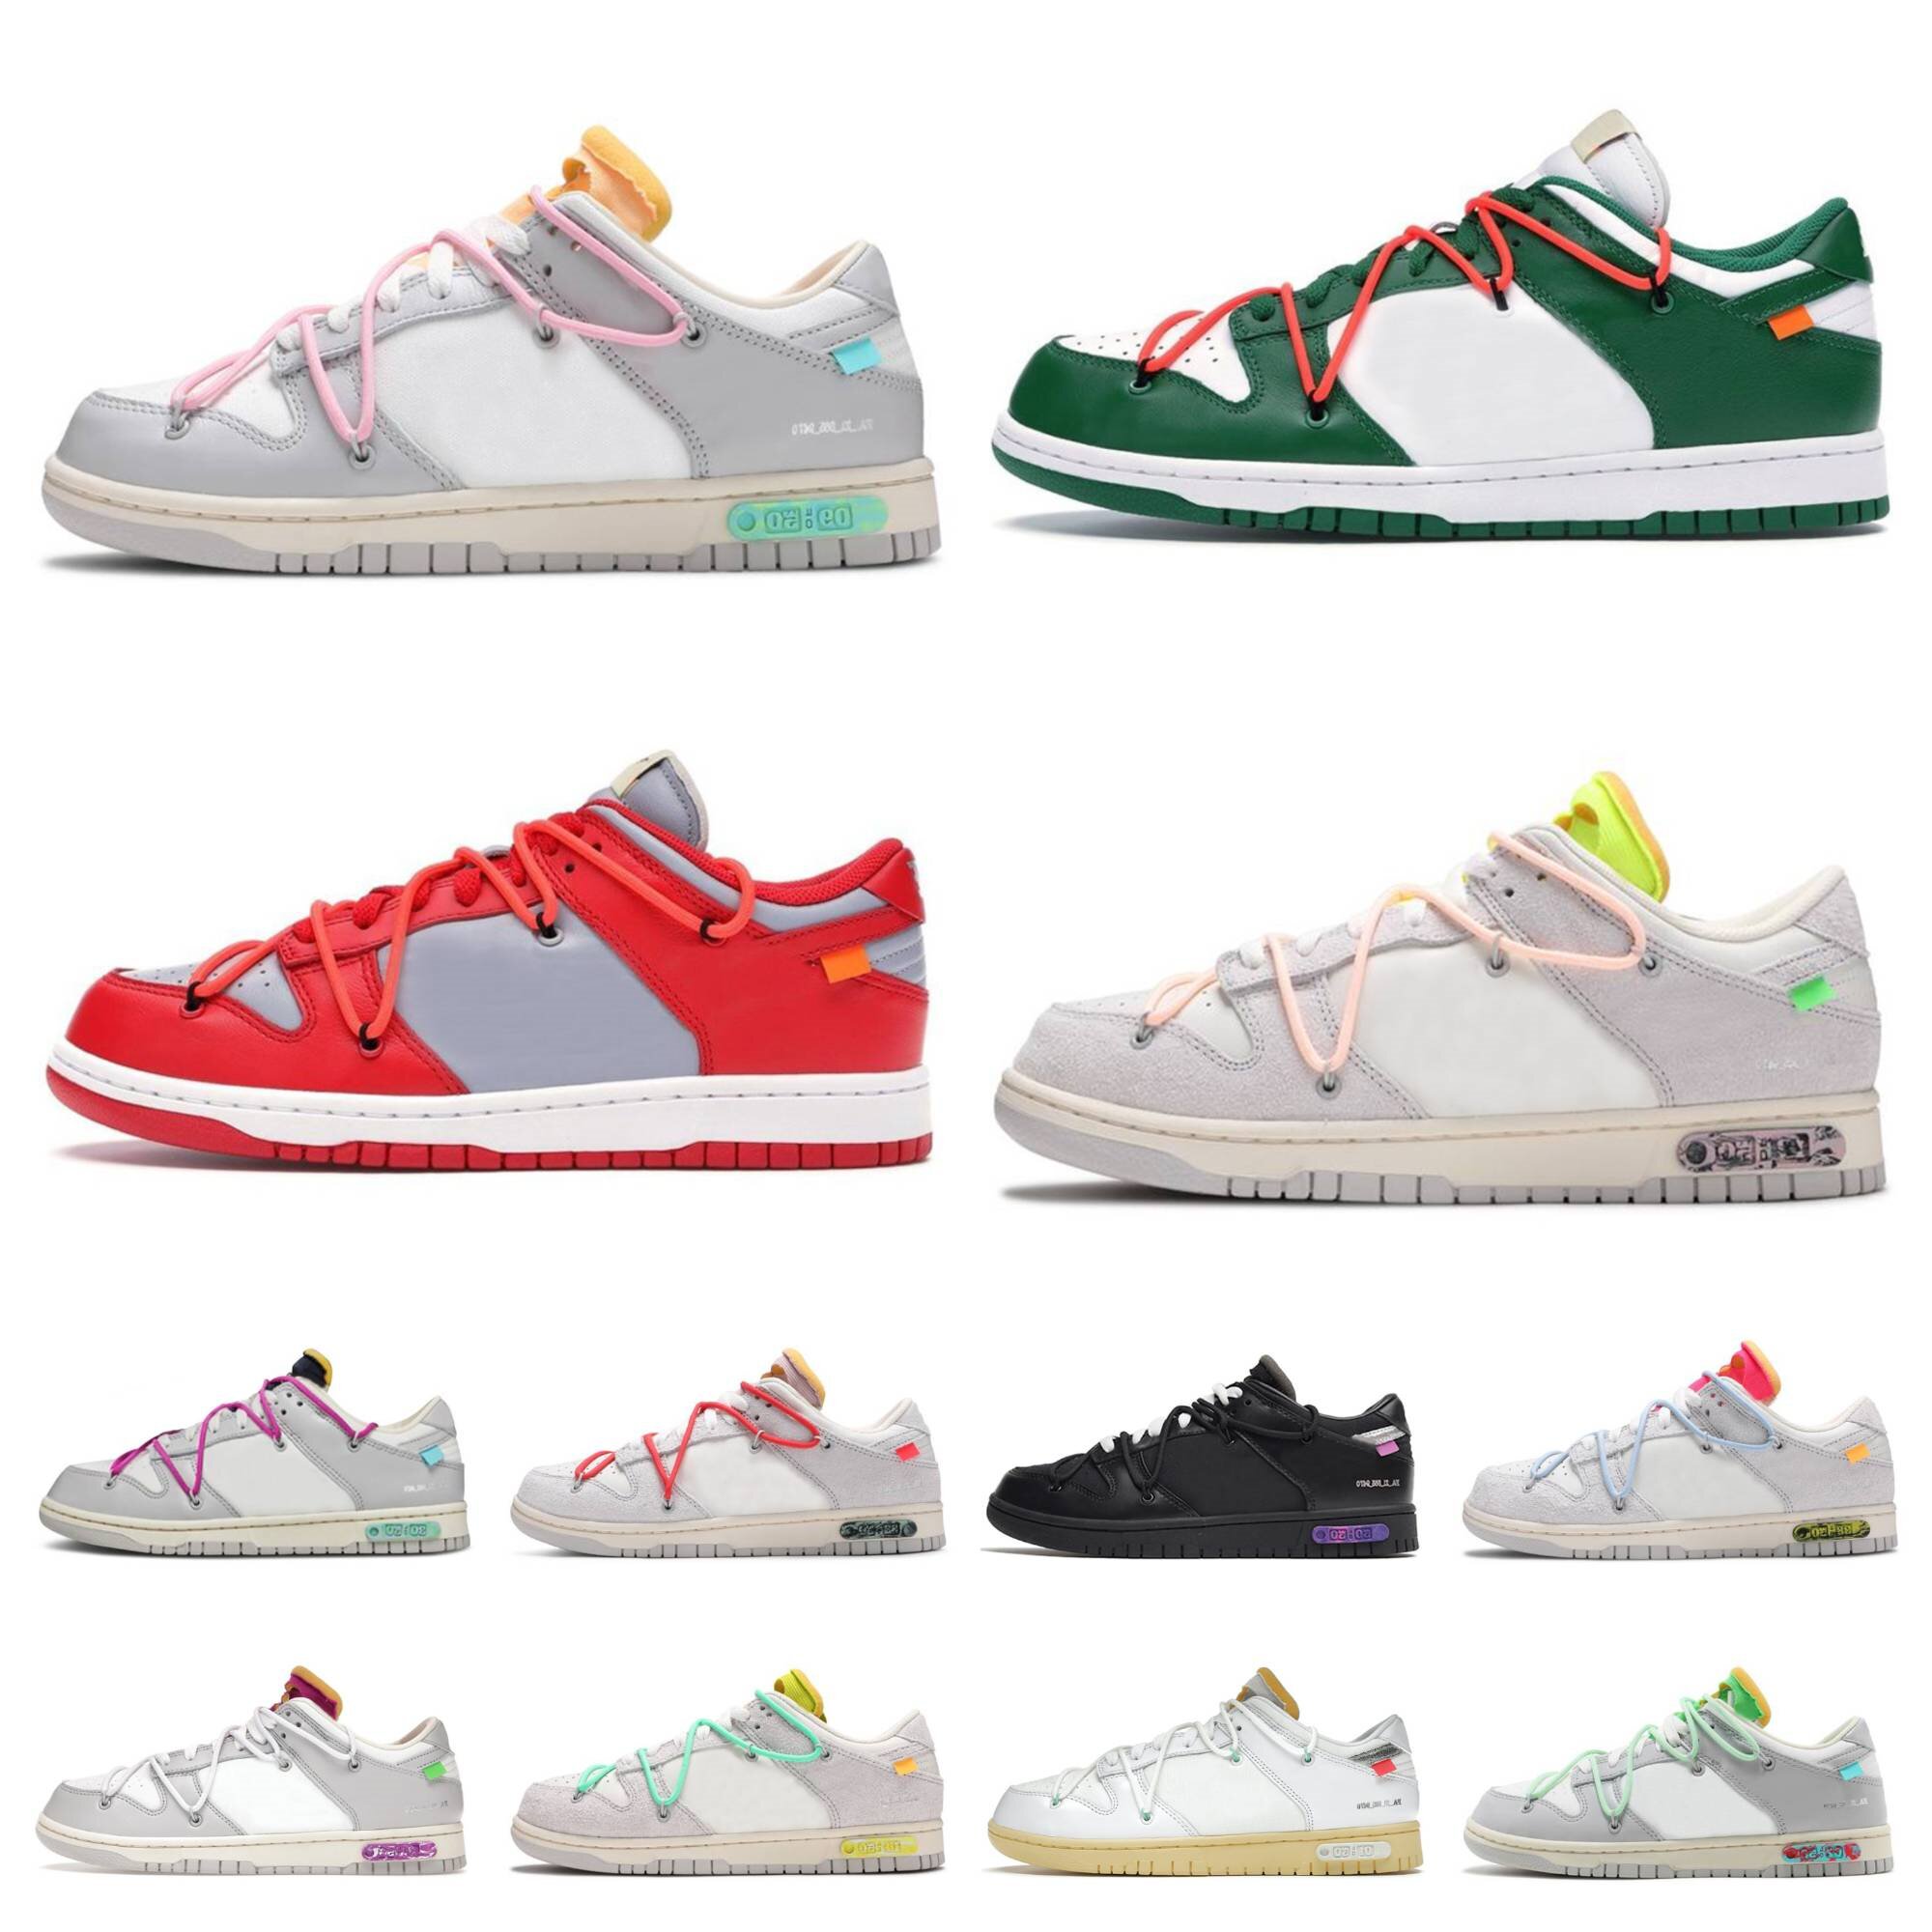 Dunks Low Casual Shoes SB Dunksb Seafoam Lot 1 09 de 50 University Red Pine Green White The 50 Ts Night of Mischief Sail Gray Chicago Mens Women Designer Trainer Sneakers